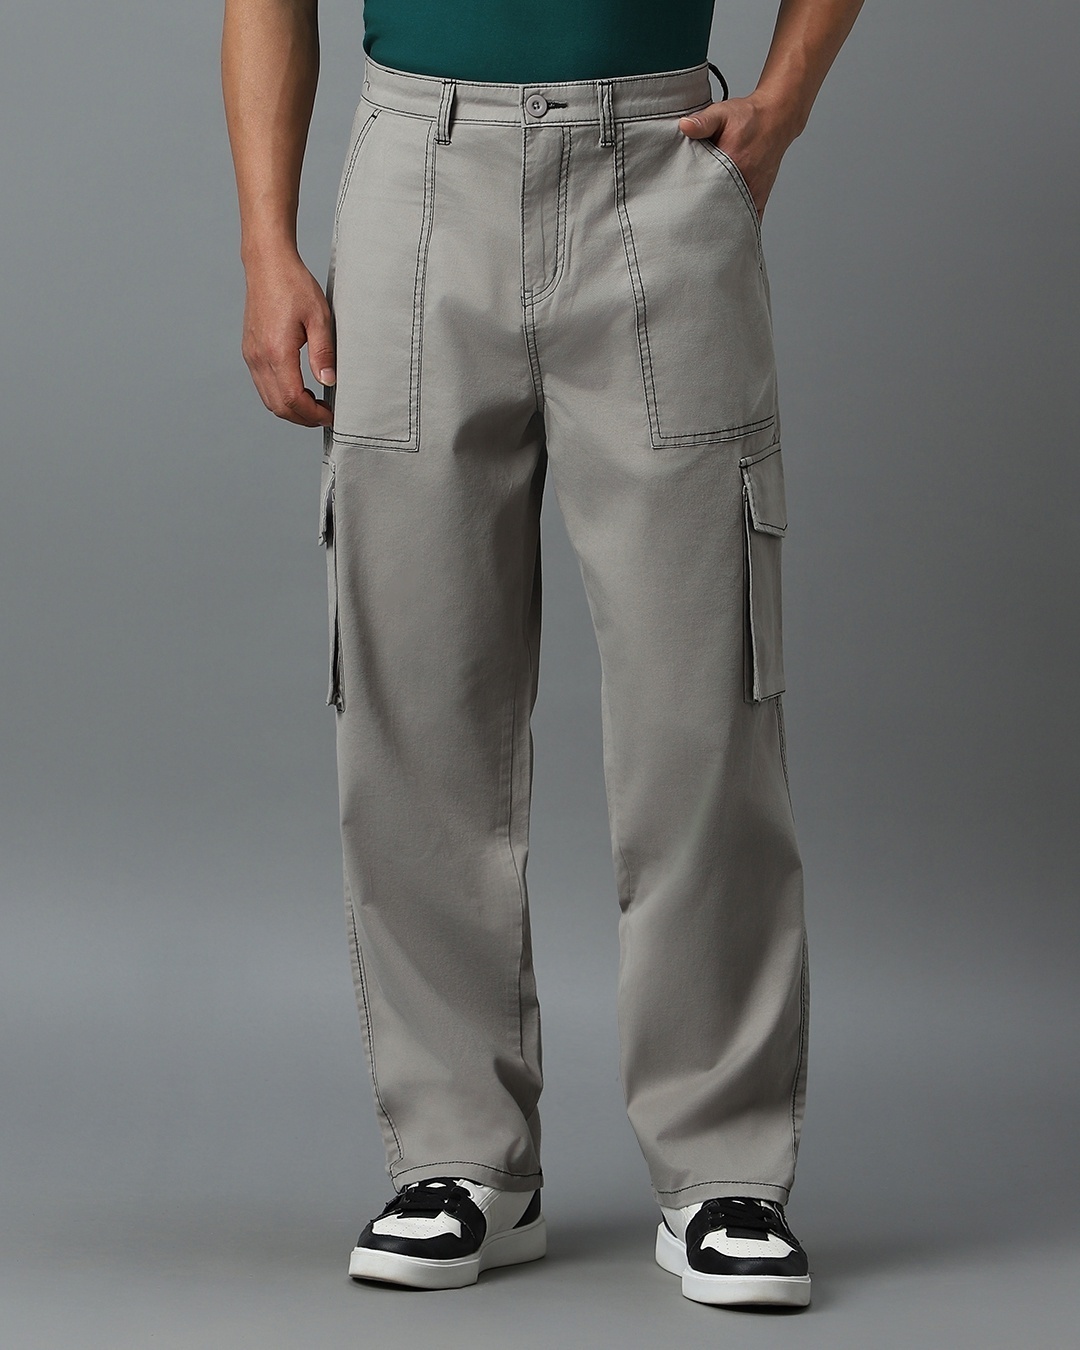 Relaxed Fit Cargo trousers - Beige - Men | H&M IN